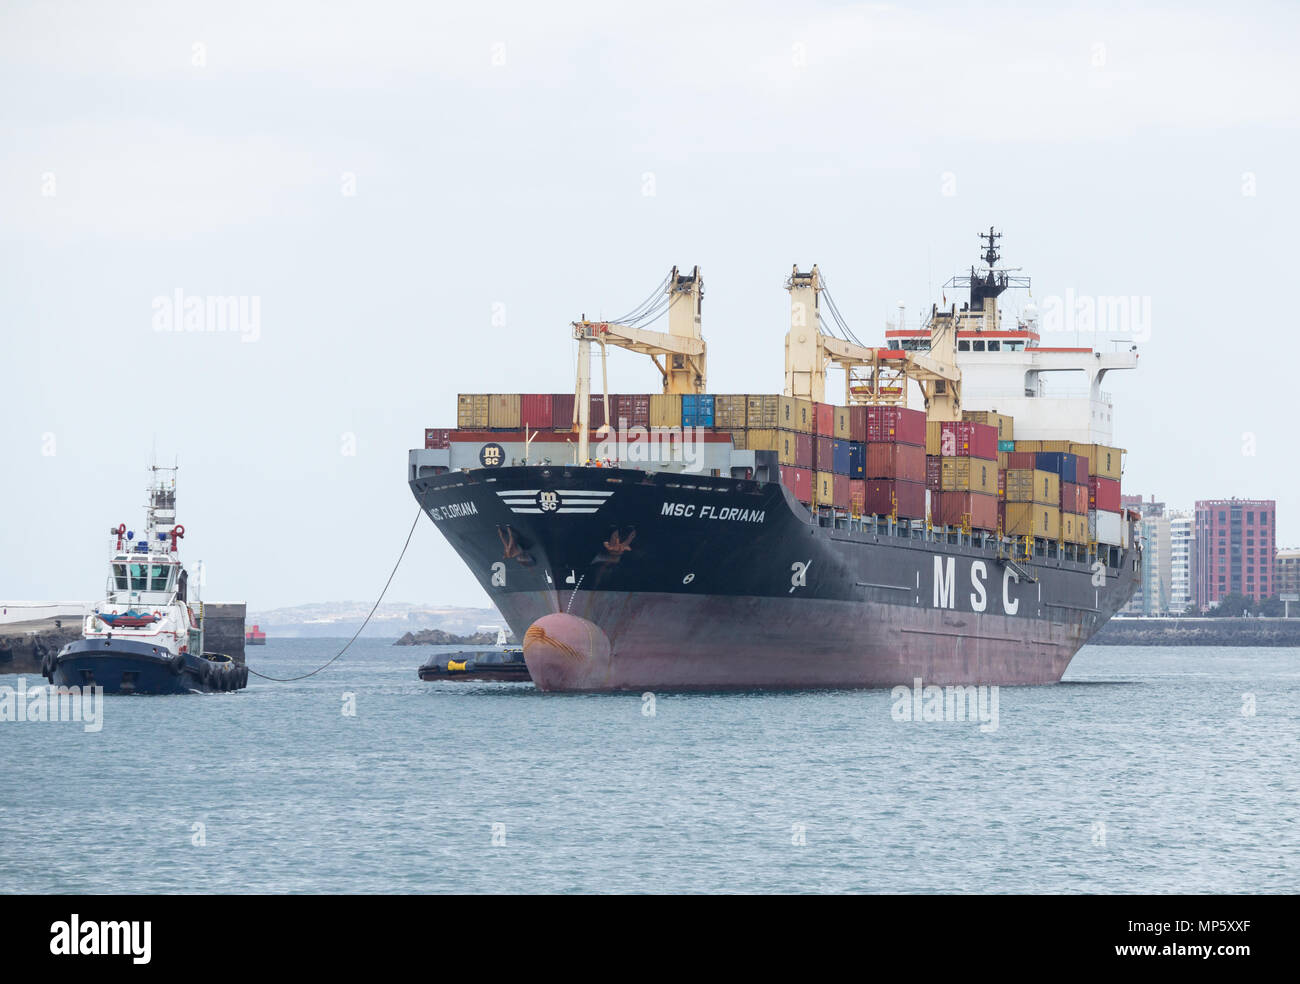 Tug boats guiding MSC Floriana container ship into port in Las Palmas on Gran Canaria, Canary Islands, Spain Stock Photo